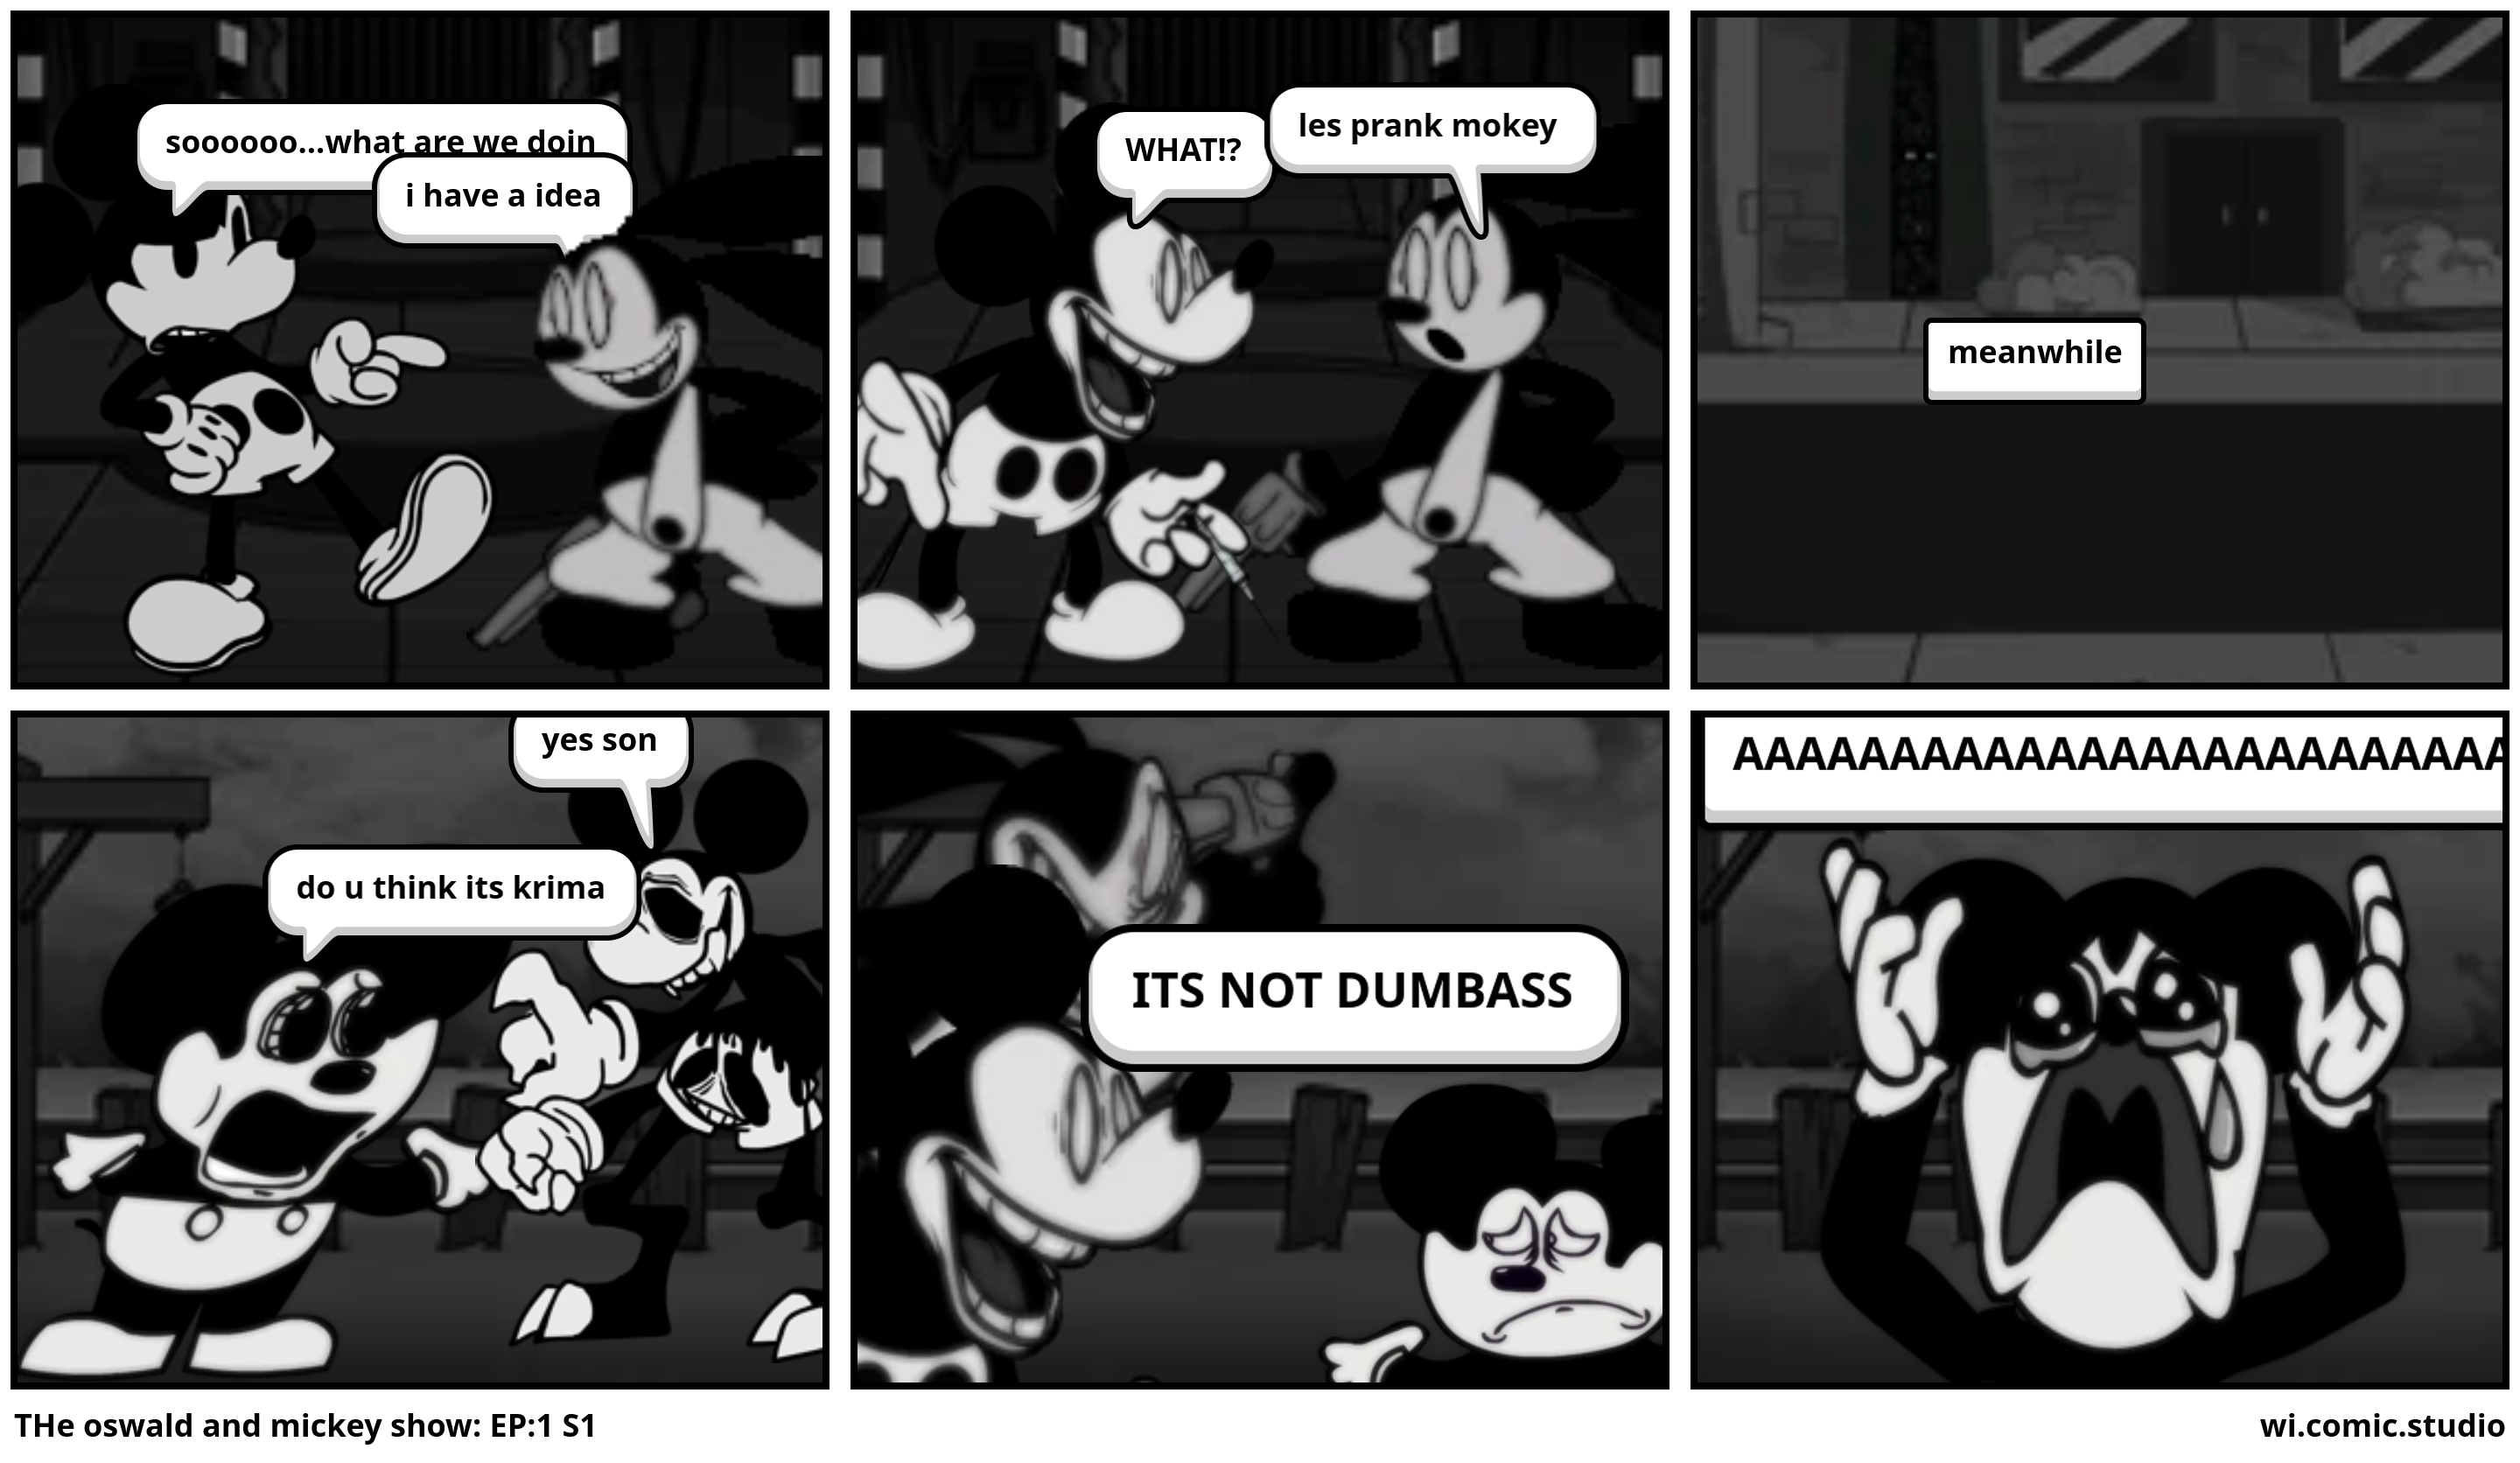 THe oswald and mickey show: EP:1 S1